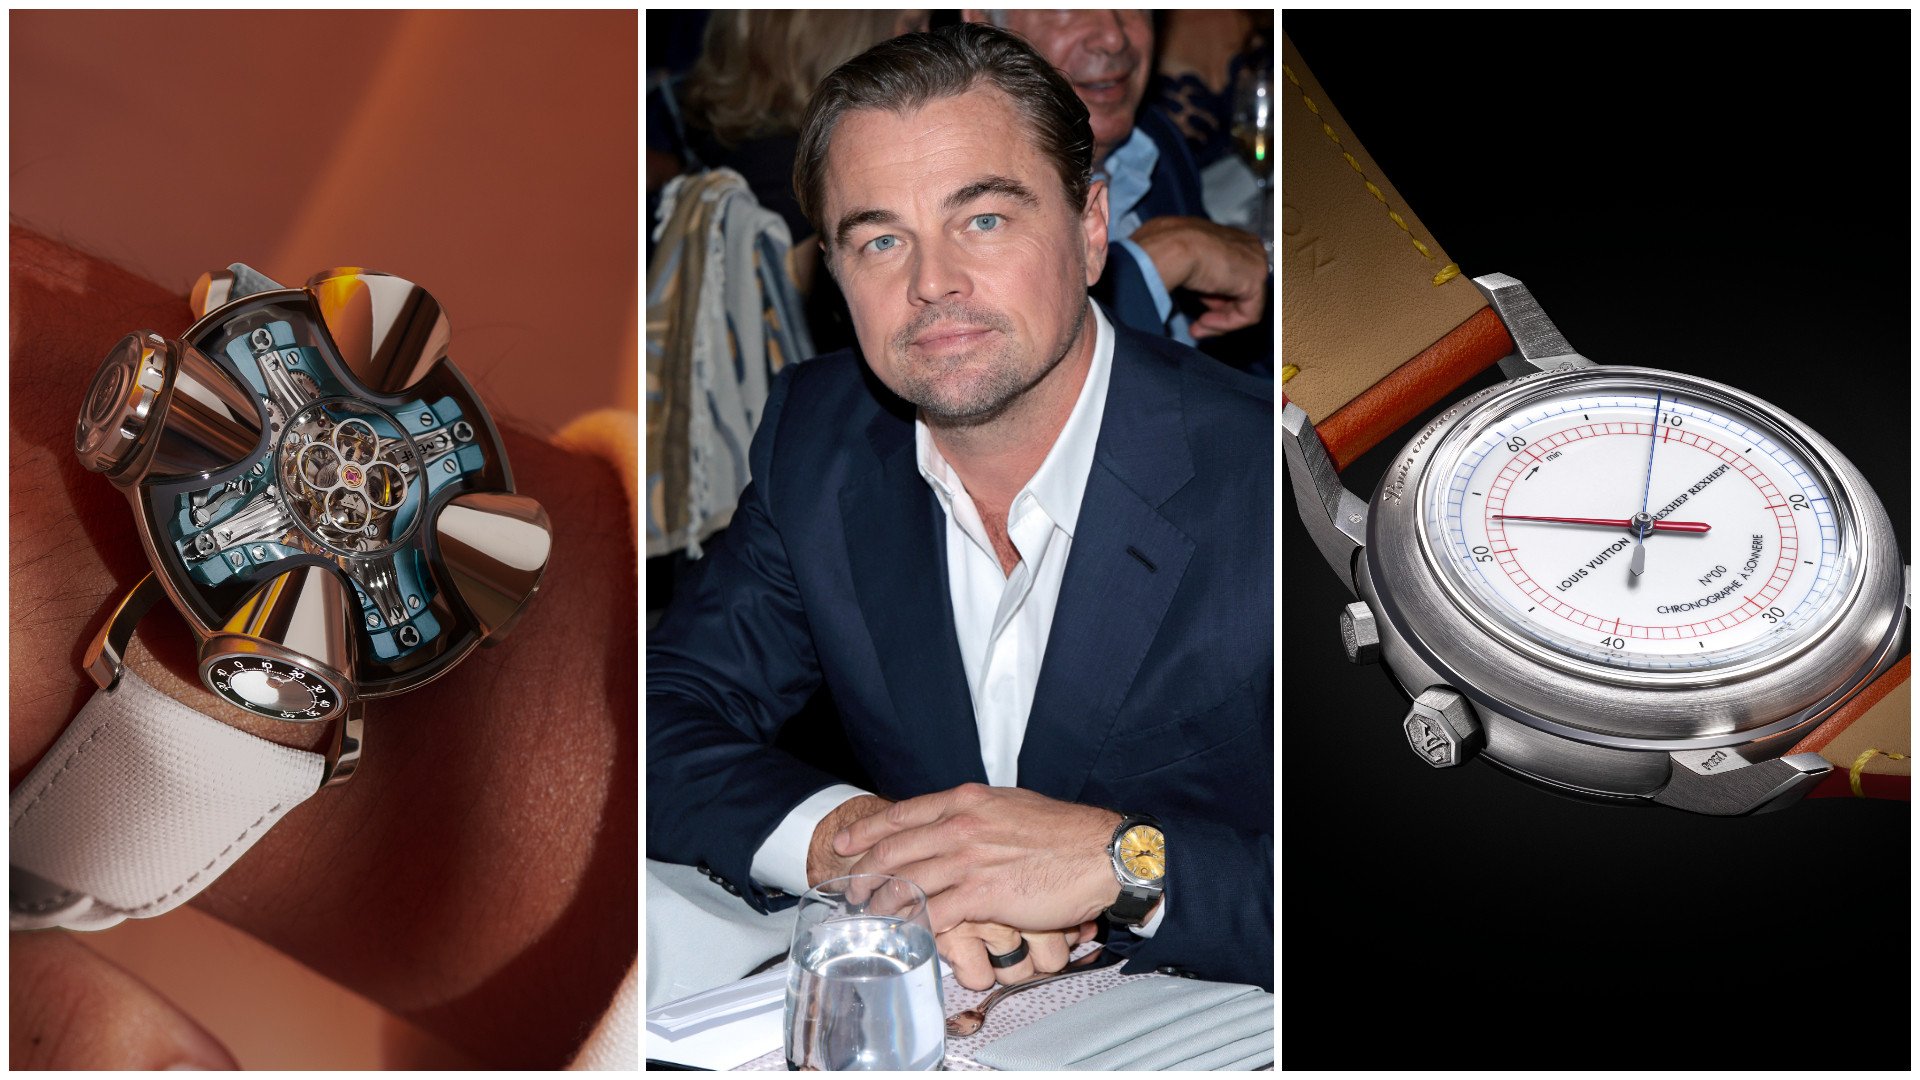 From left to right: MB&F released the HM11 Architect; Leonard DiCaprio joined in a US$2.3 million seed round for sustainable masion ID Geneve; Louis Vuitton teamed up with Rexhep Rexhepi on the Akrivia LVRR-01. Photos: Handout